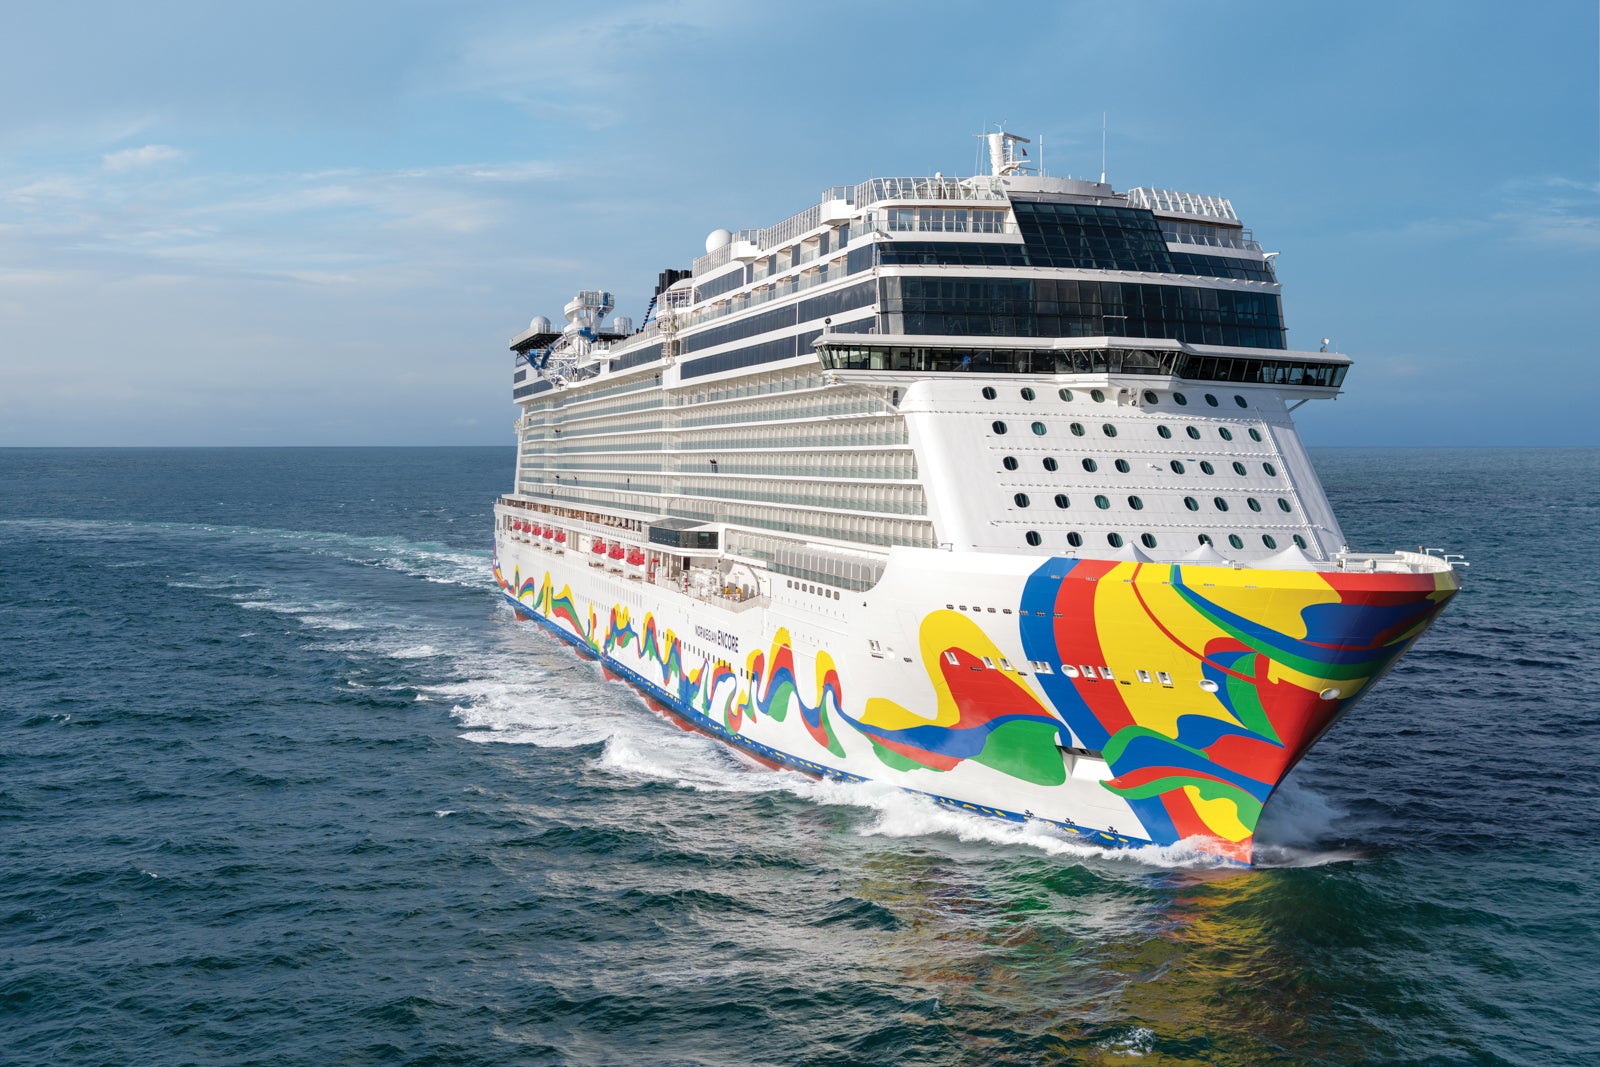 Norwegian Cruise Line's newest ship, Norwegian Encore, has room for 4,004 passengers at double occupancy.